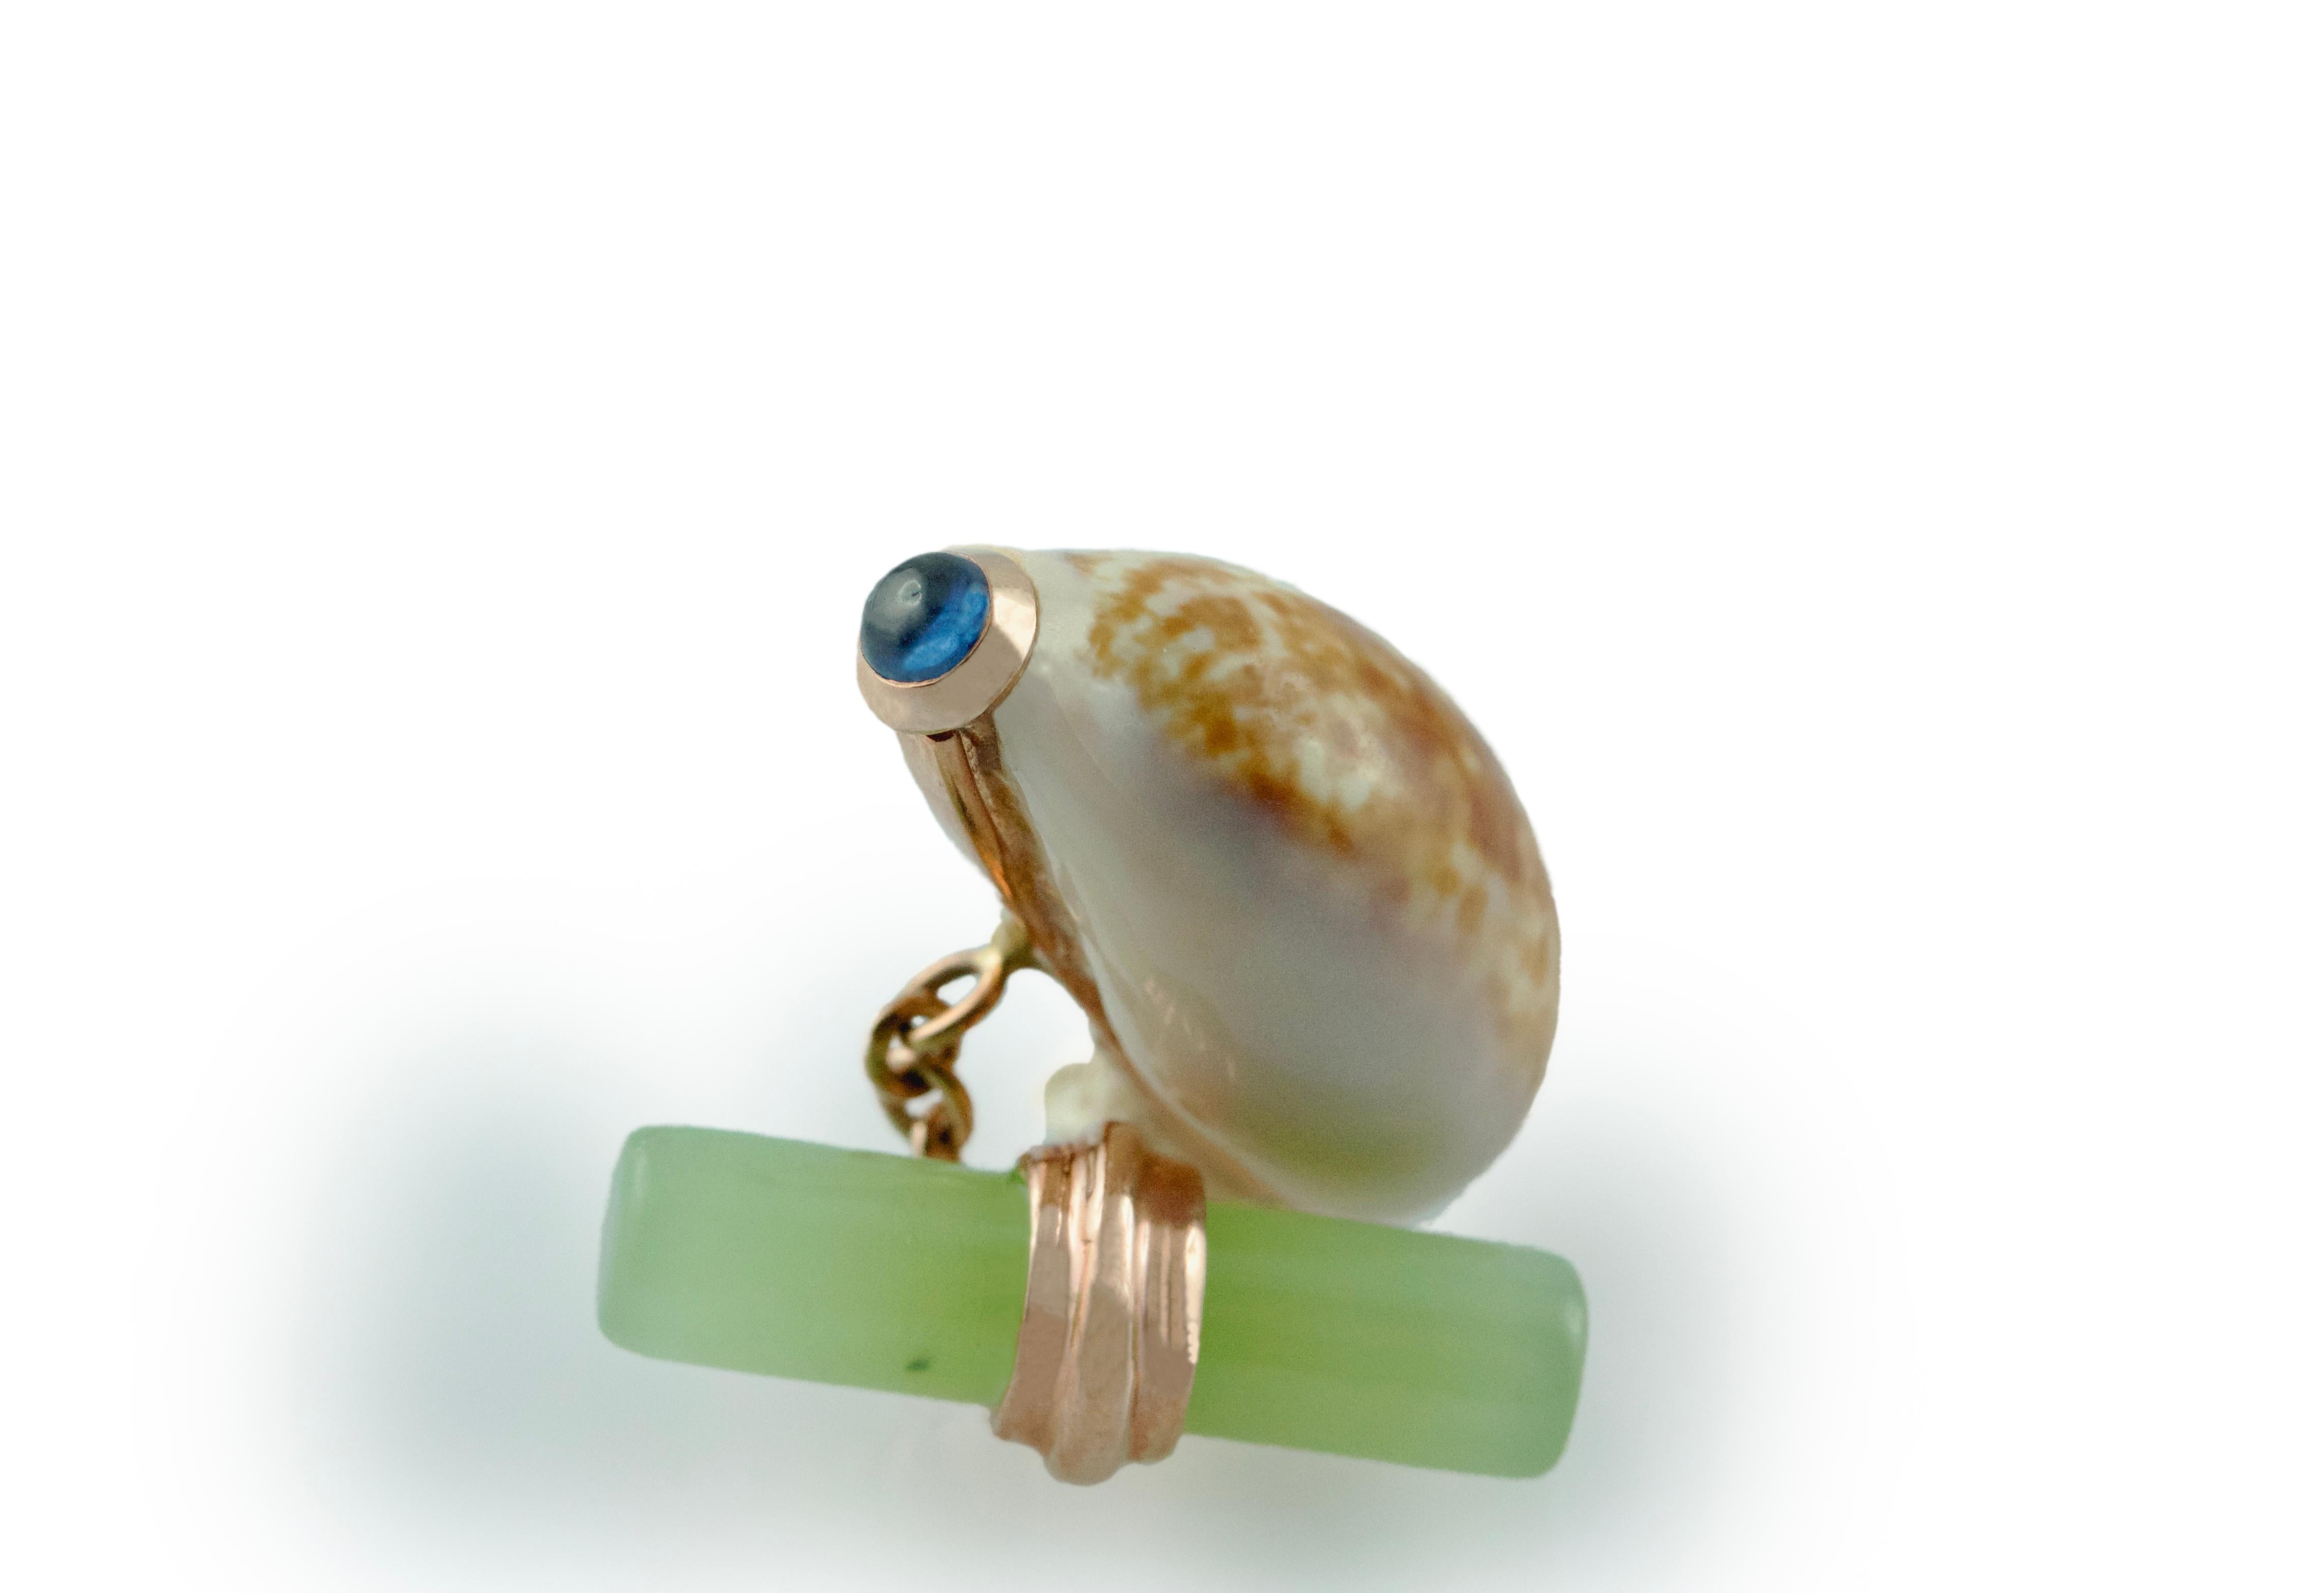 These exquisite cufflinks combine the majesty of nature with masterful craftsmanship. Their front face is a  shell, boasting its natural pattern in neutral colors and adorned at the top with a sapphire mounted in rose gold. The post is made of the